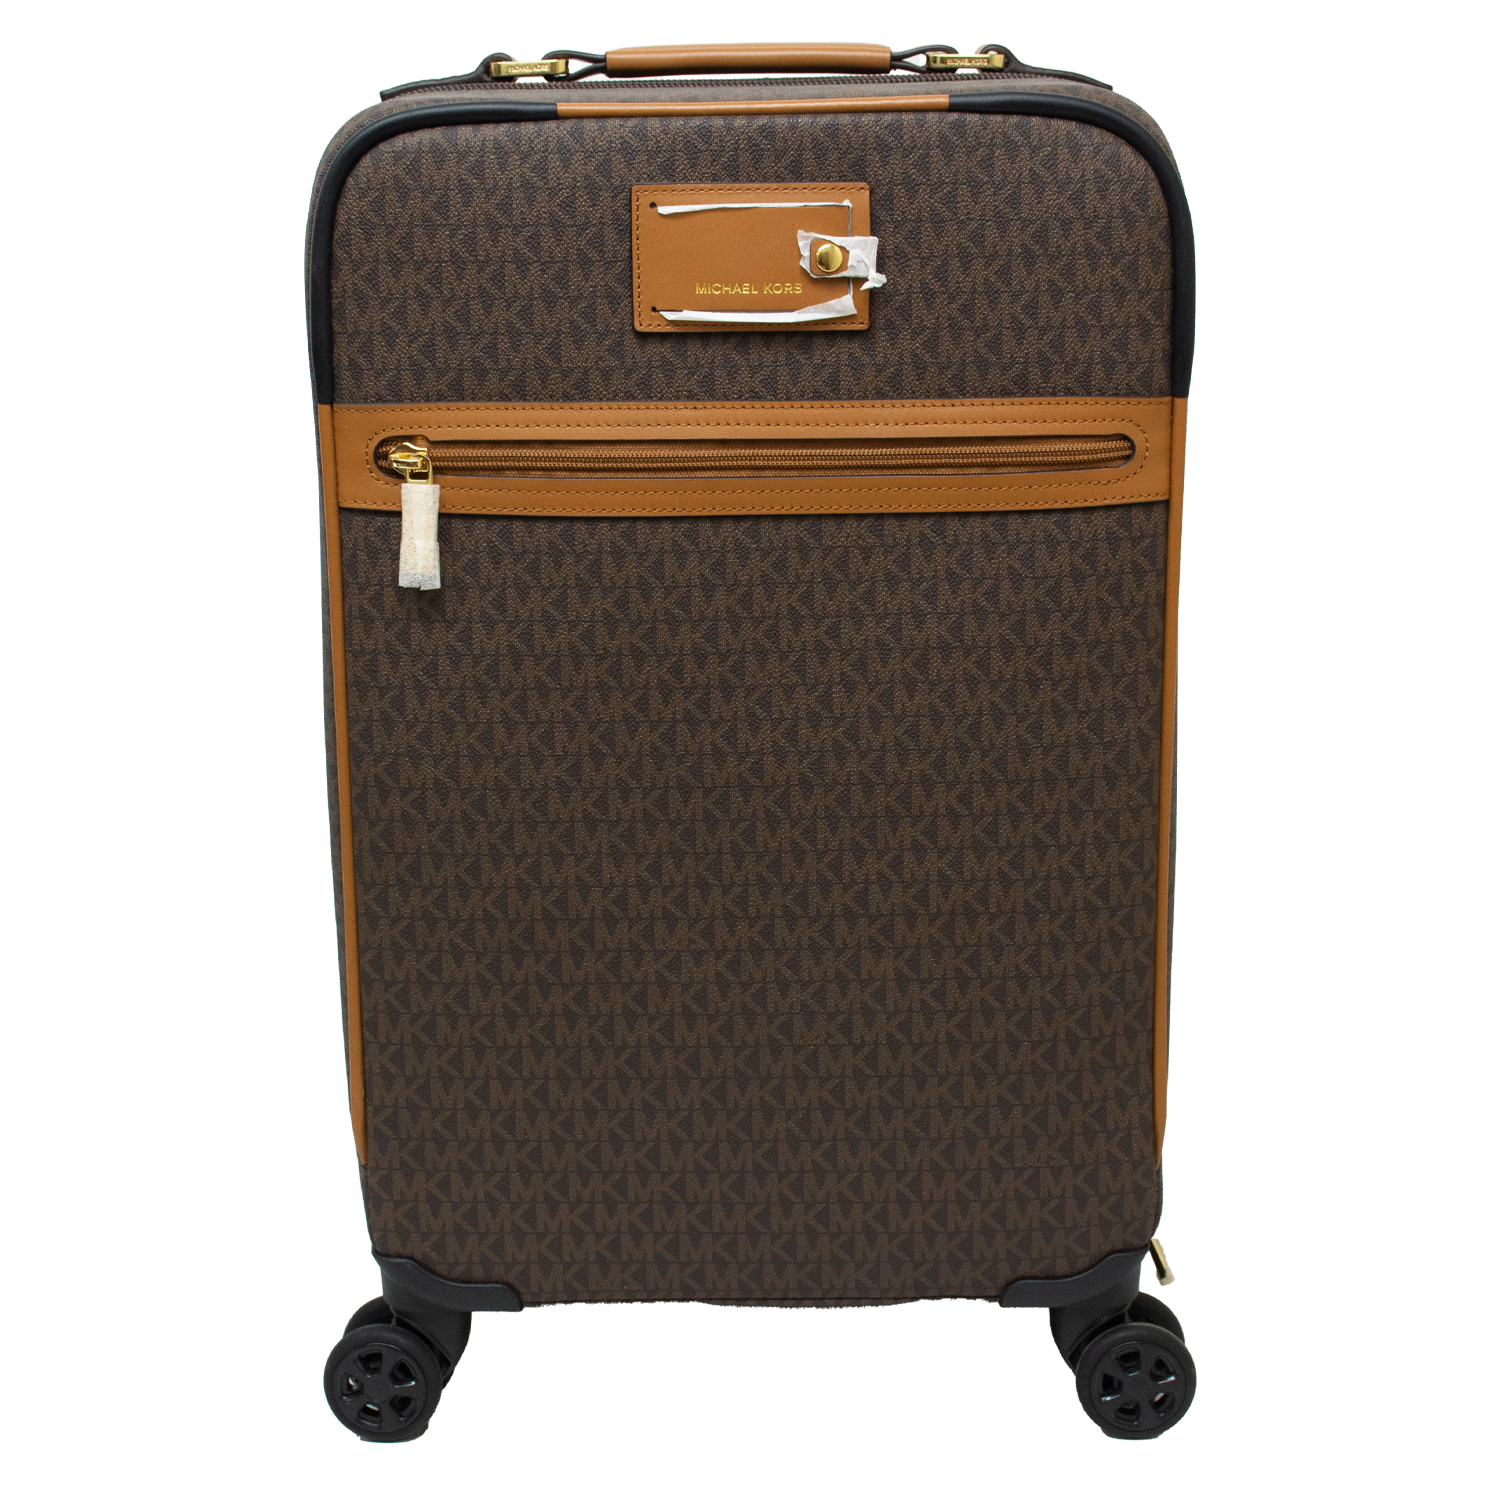 Michael Kors Signature Travel Trolley Carry-On Suitcase - Brown - 35F8GTFN1B